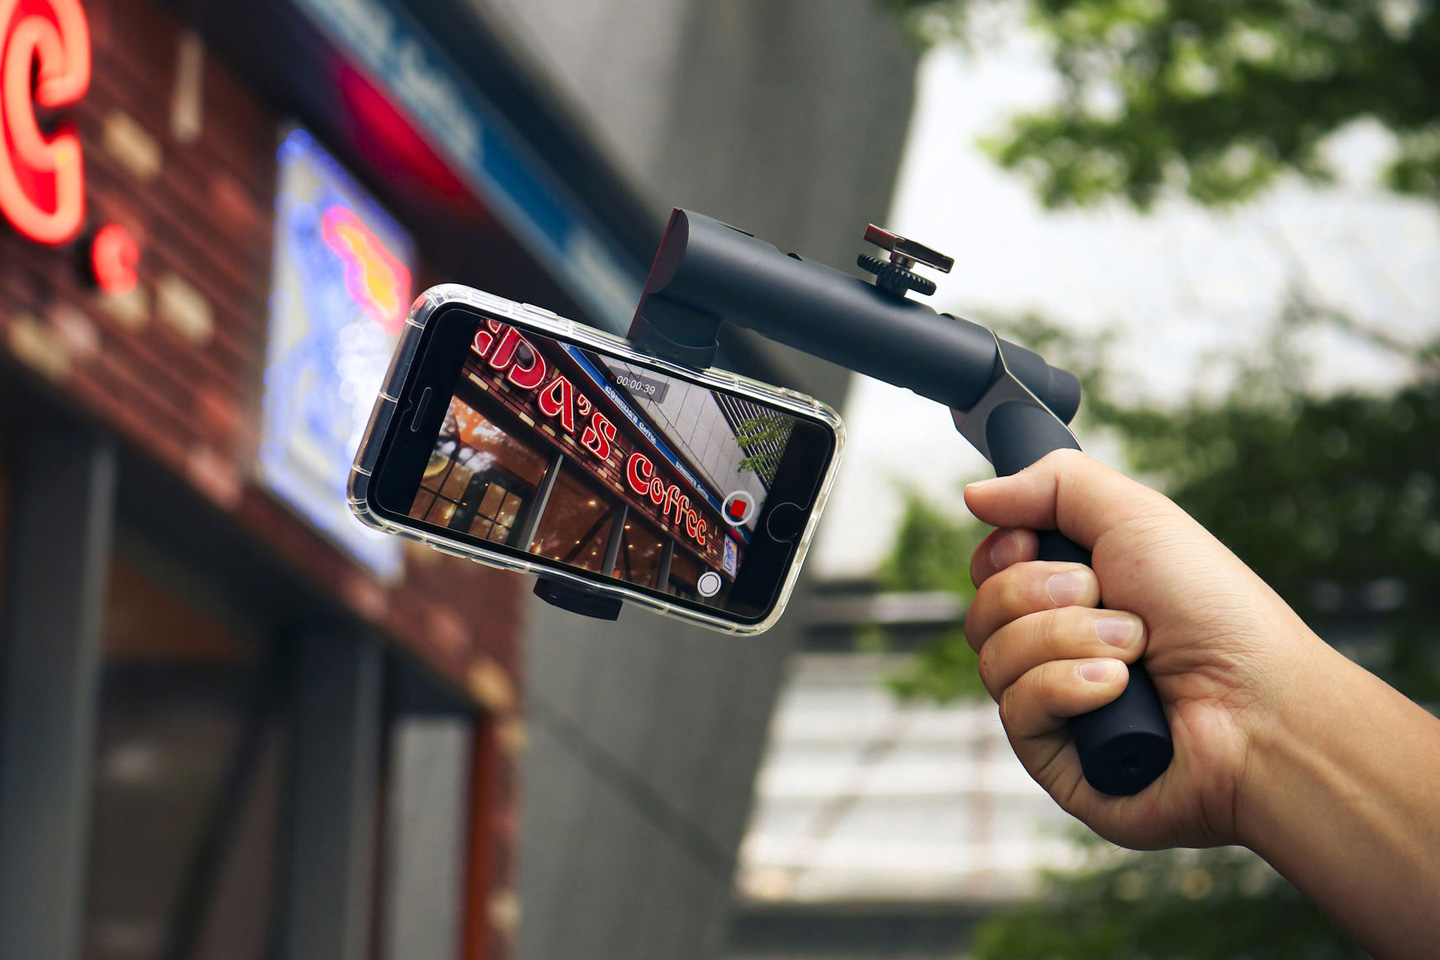 The CliqueFie Sway offers battery-less single-axis stabilization in an incredibly slick, pocket-friendly design